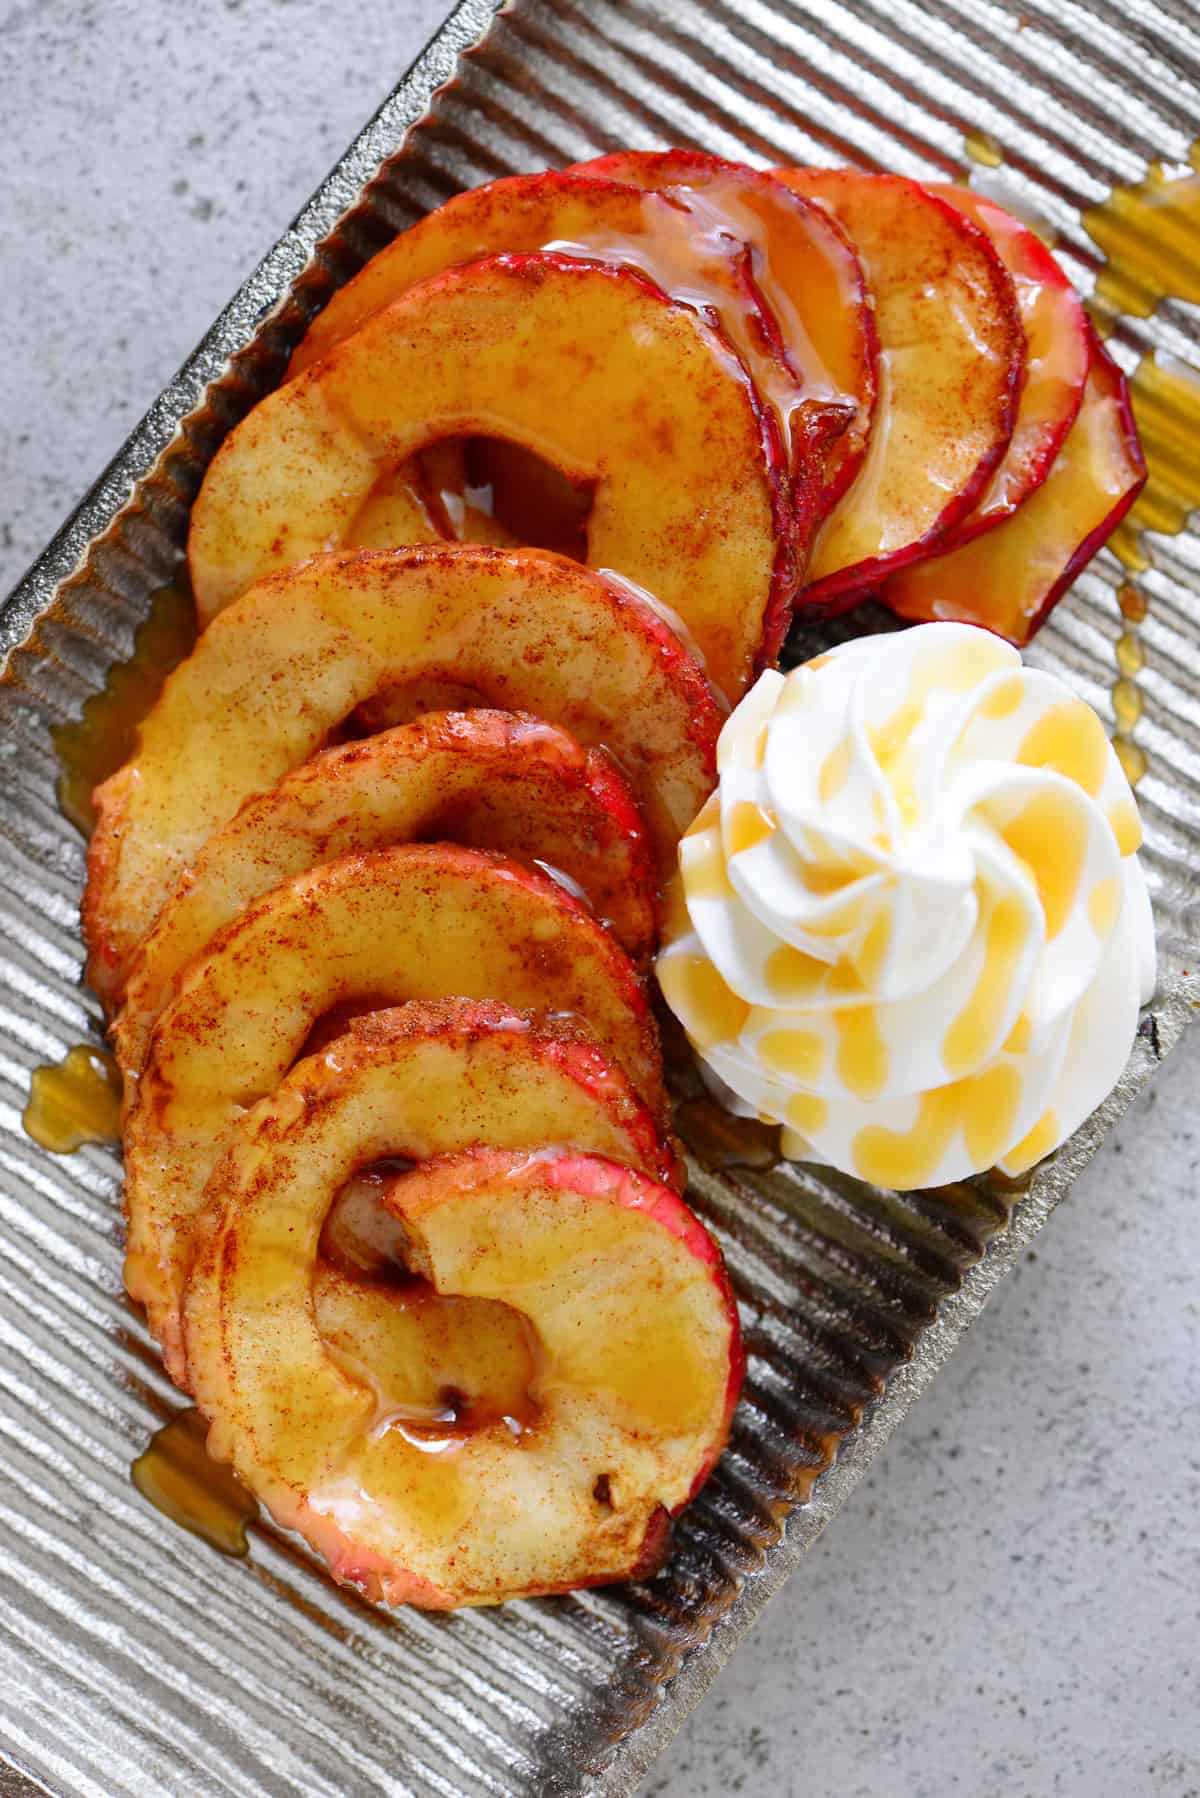 baked apple dessert drizzled with caramel